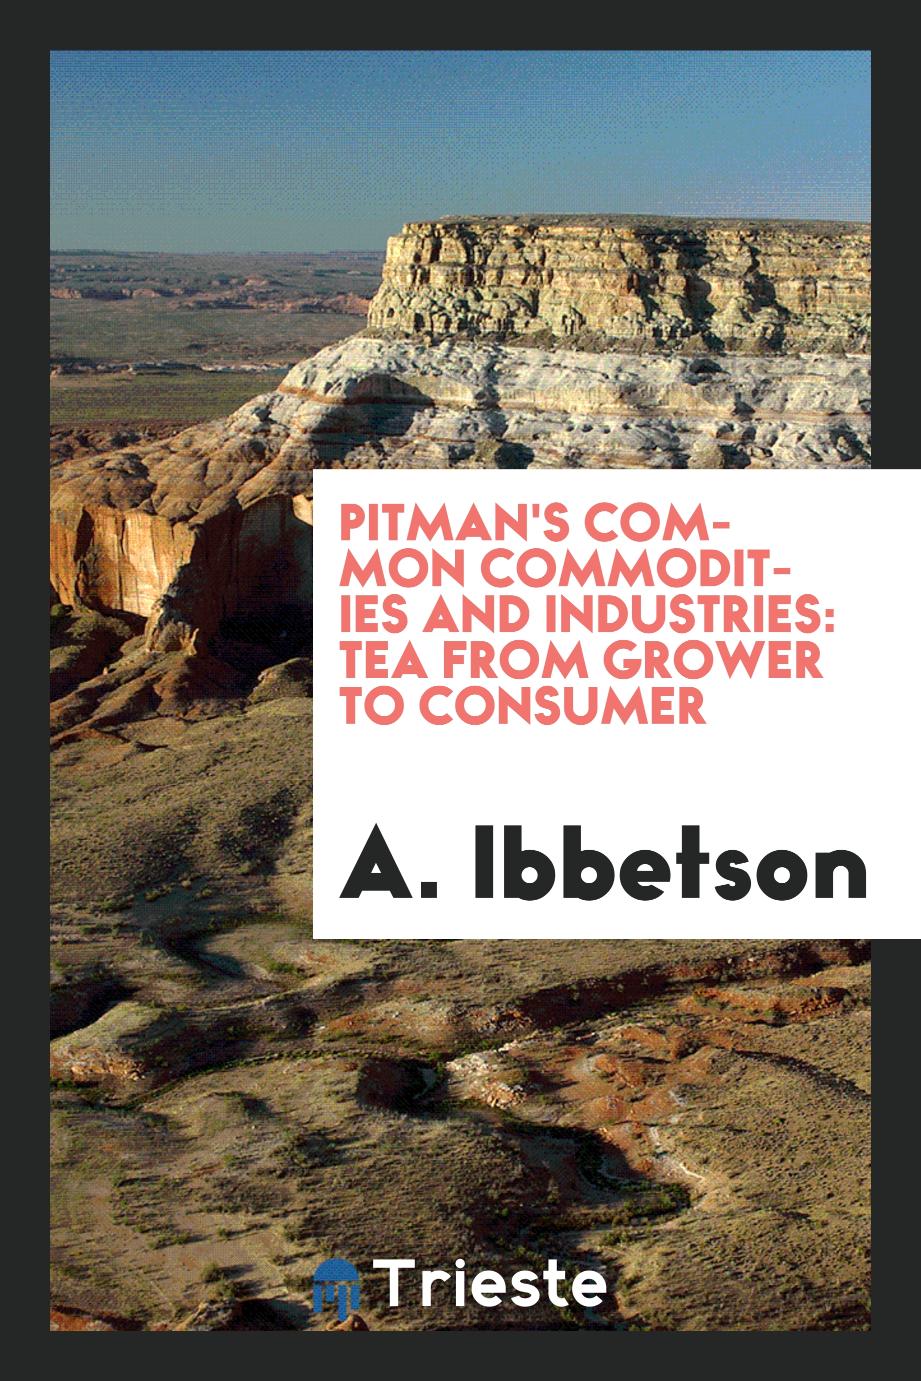 Pitman's Common Commodities and Industries: Tea from Grower to Consumer